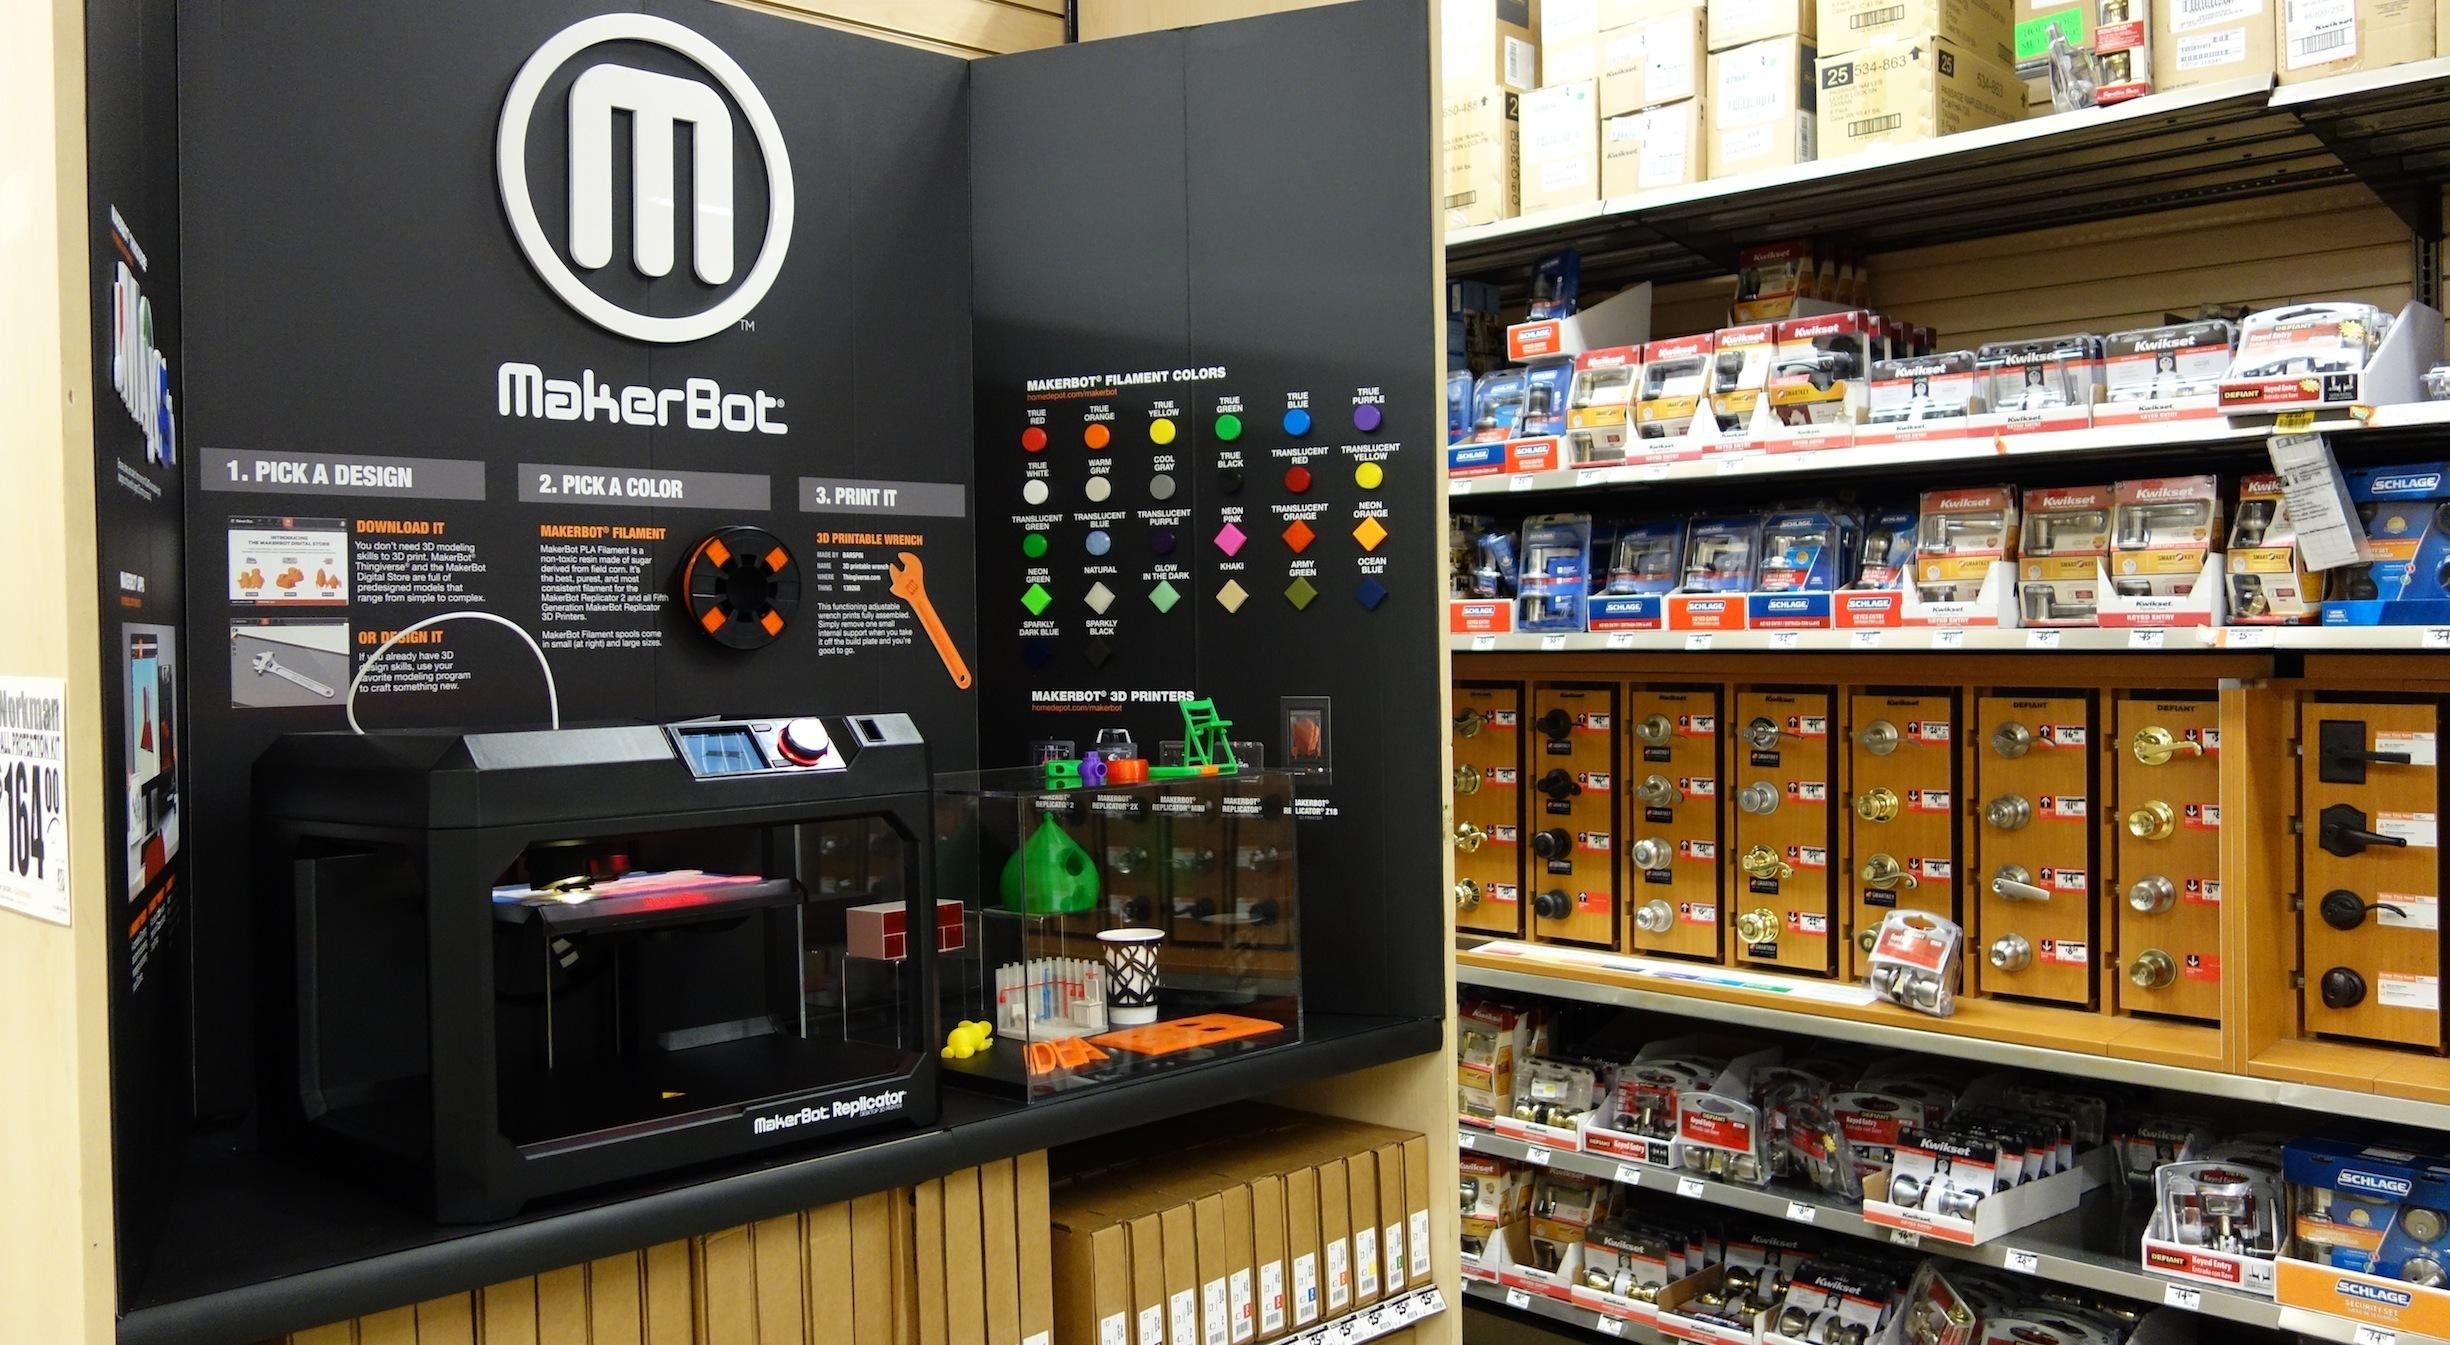 Home Depot and MakerBot to Expand Their InStore Pilot Program to 39